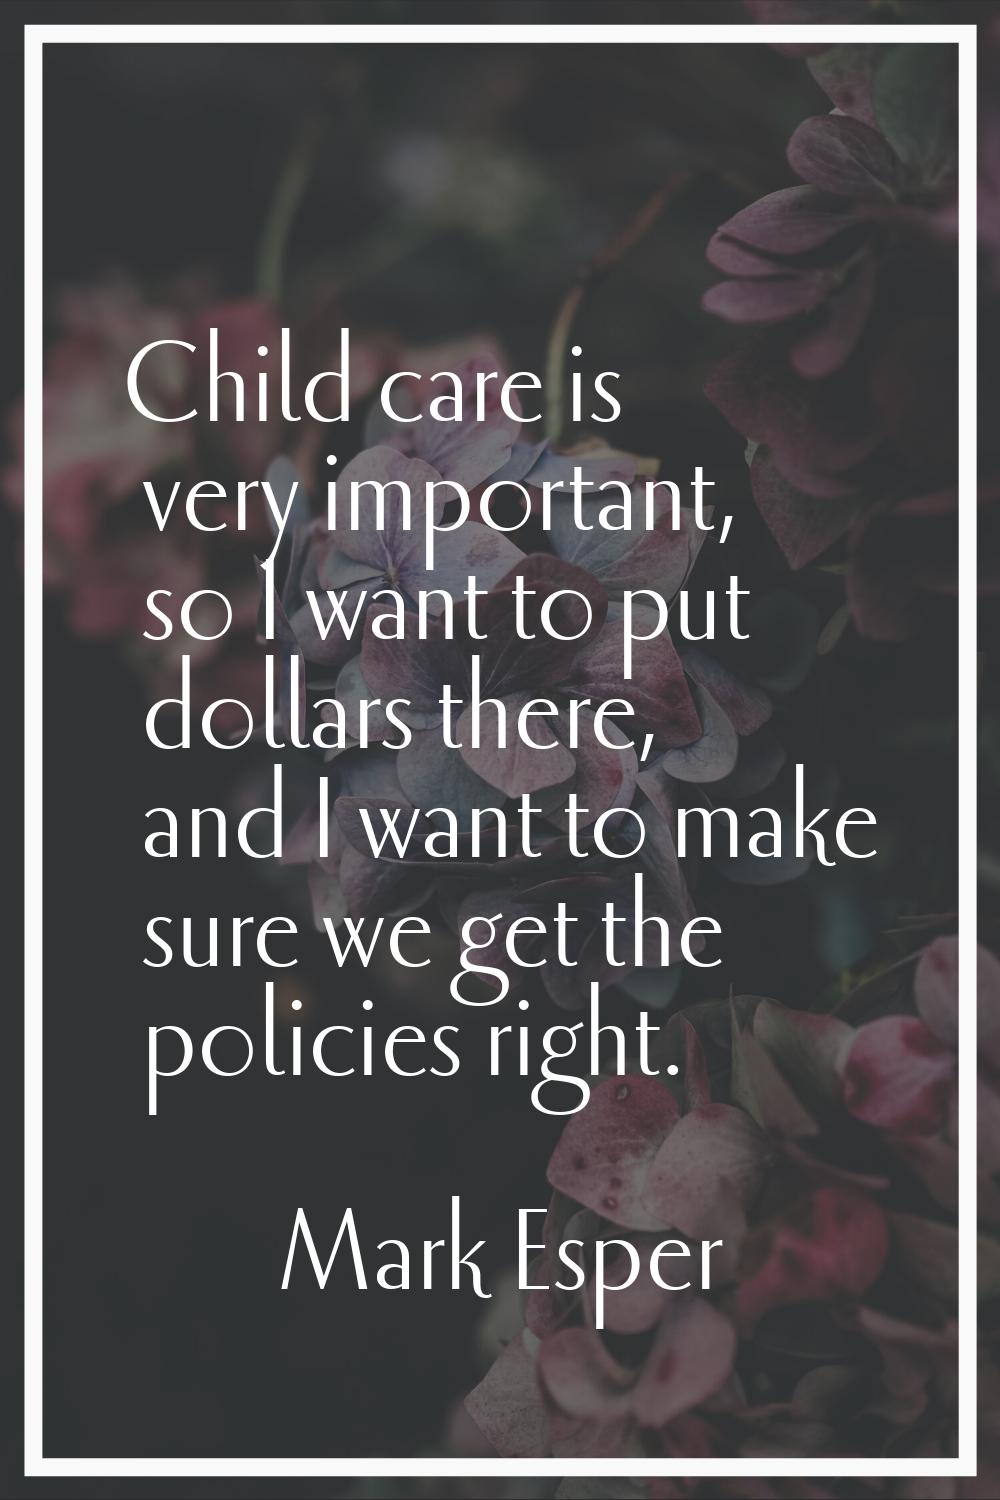 Child care is very important, so I want to put dollars there, and I want to make sure we get the po